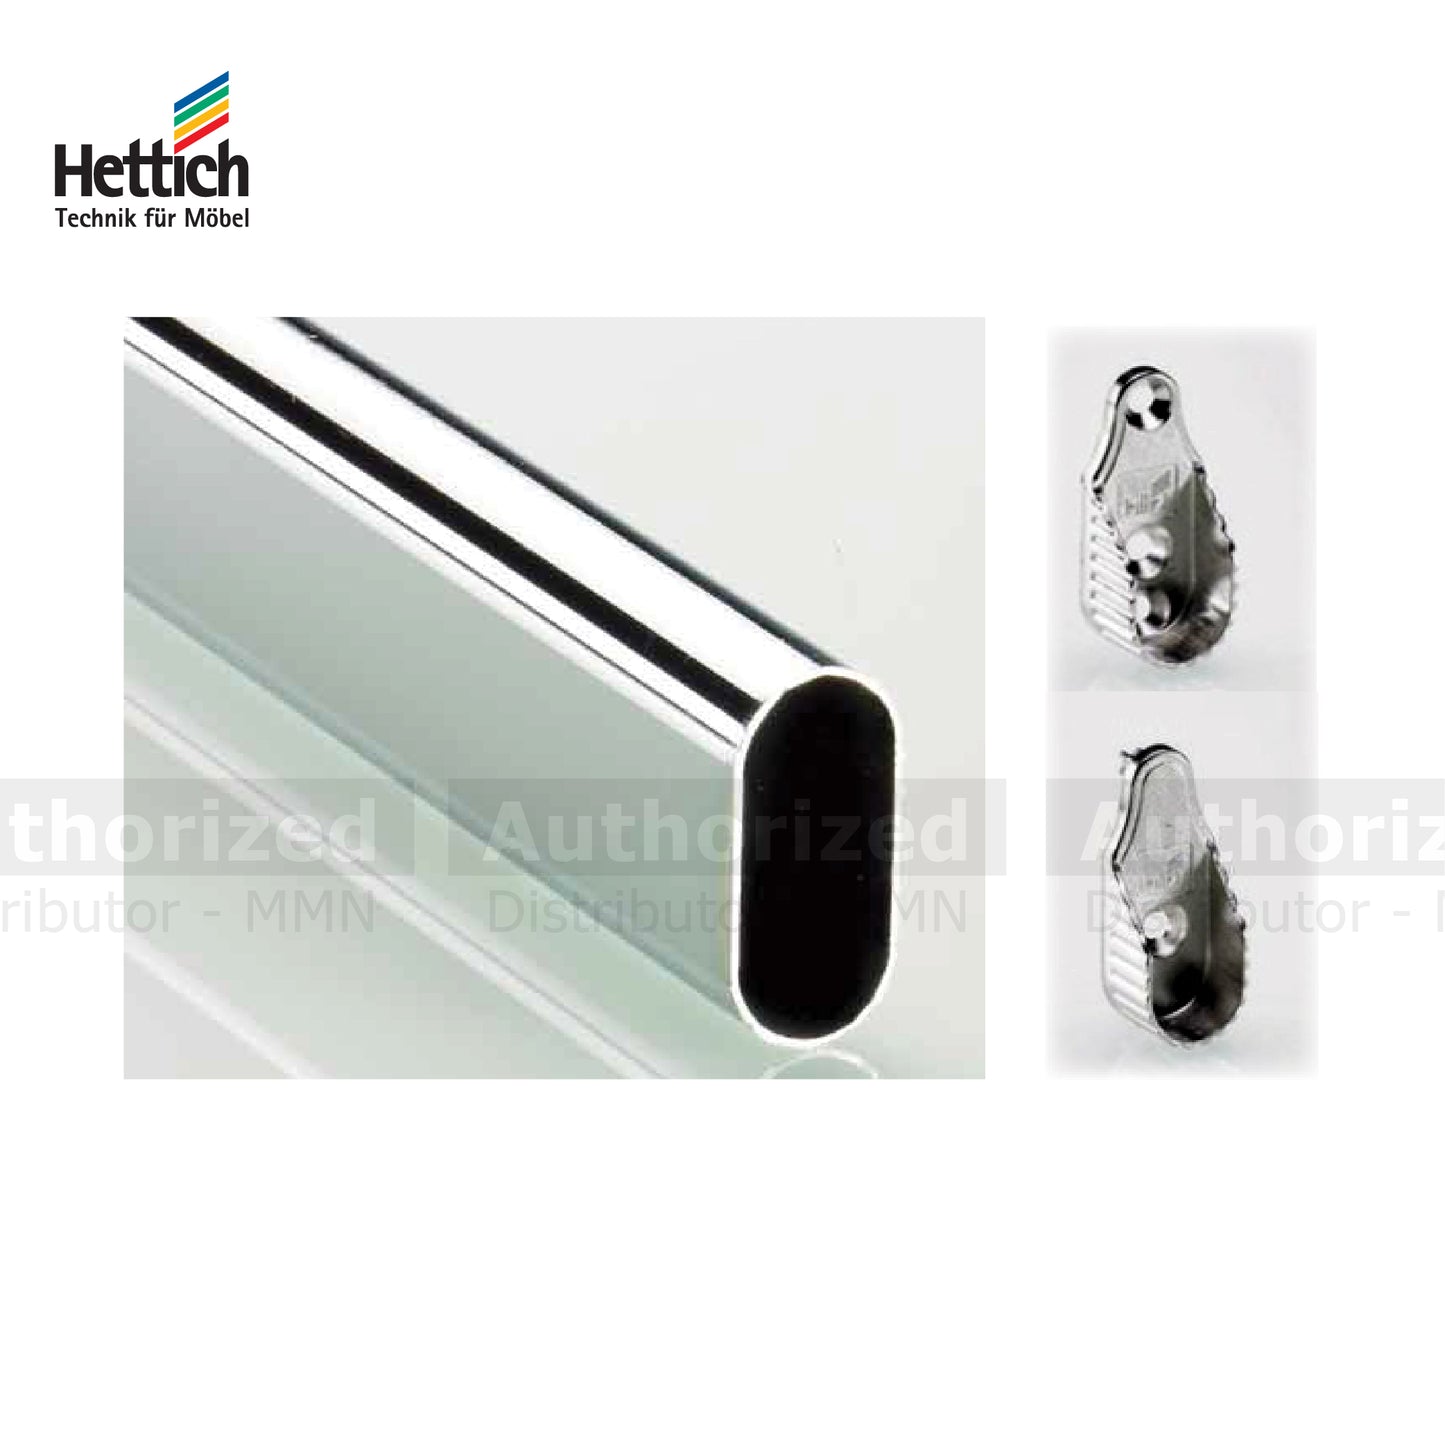 Hettich Oval Wardrobe Bar, Lenght 2000mm, Steel Chrome Plated Finish - HT47615